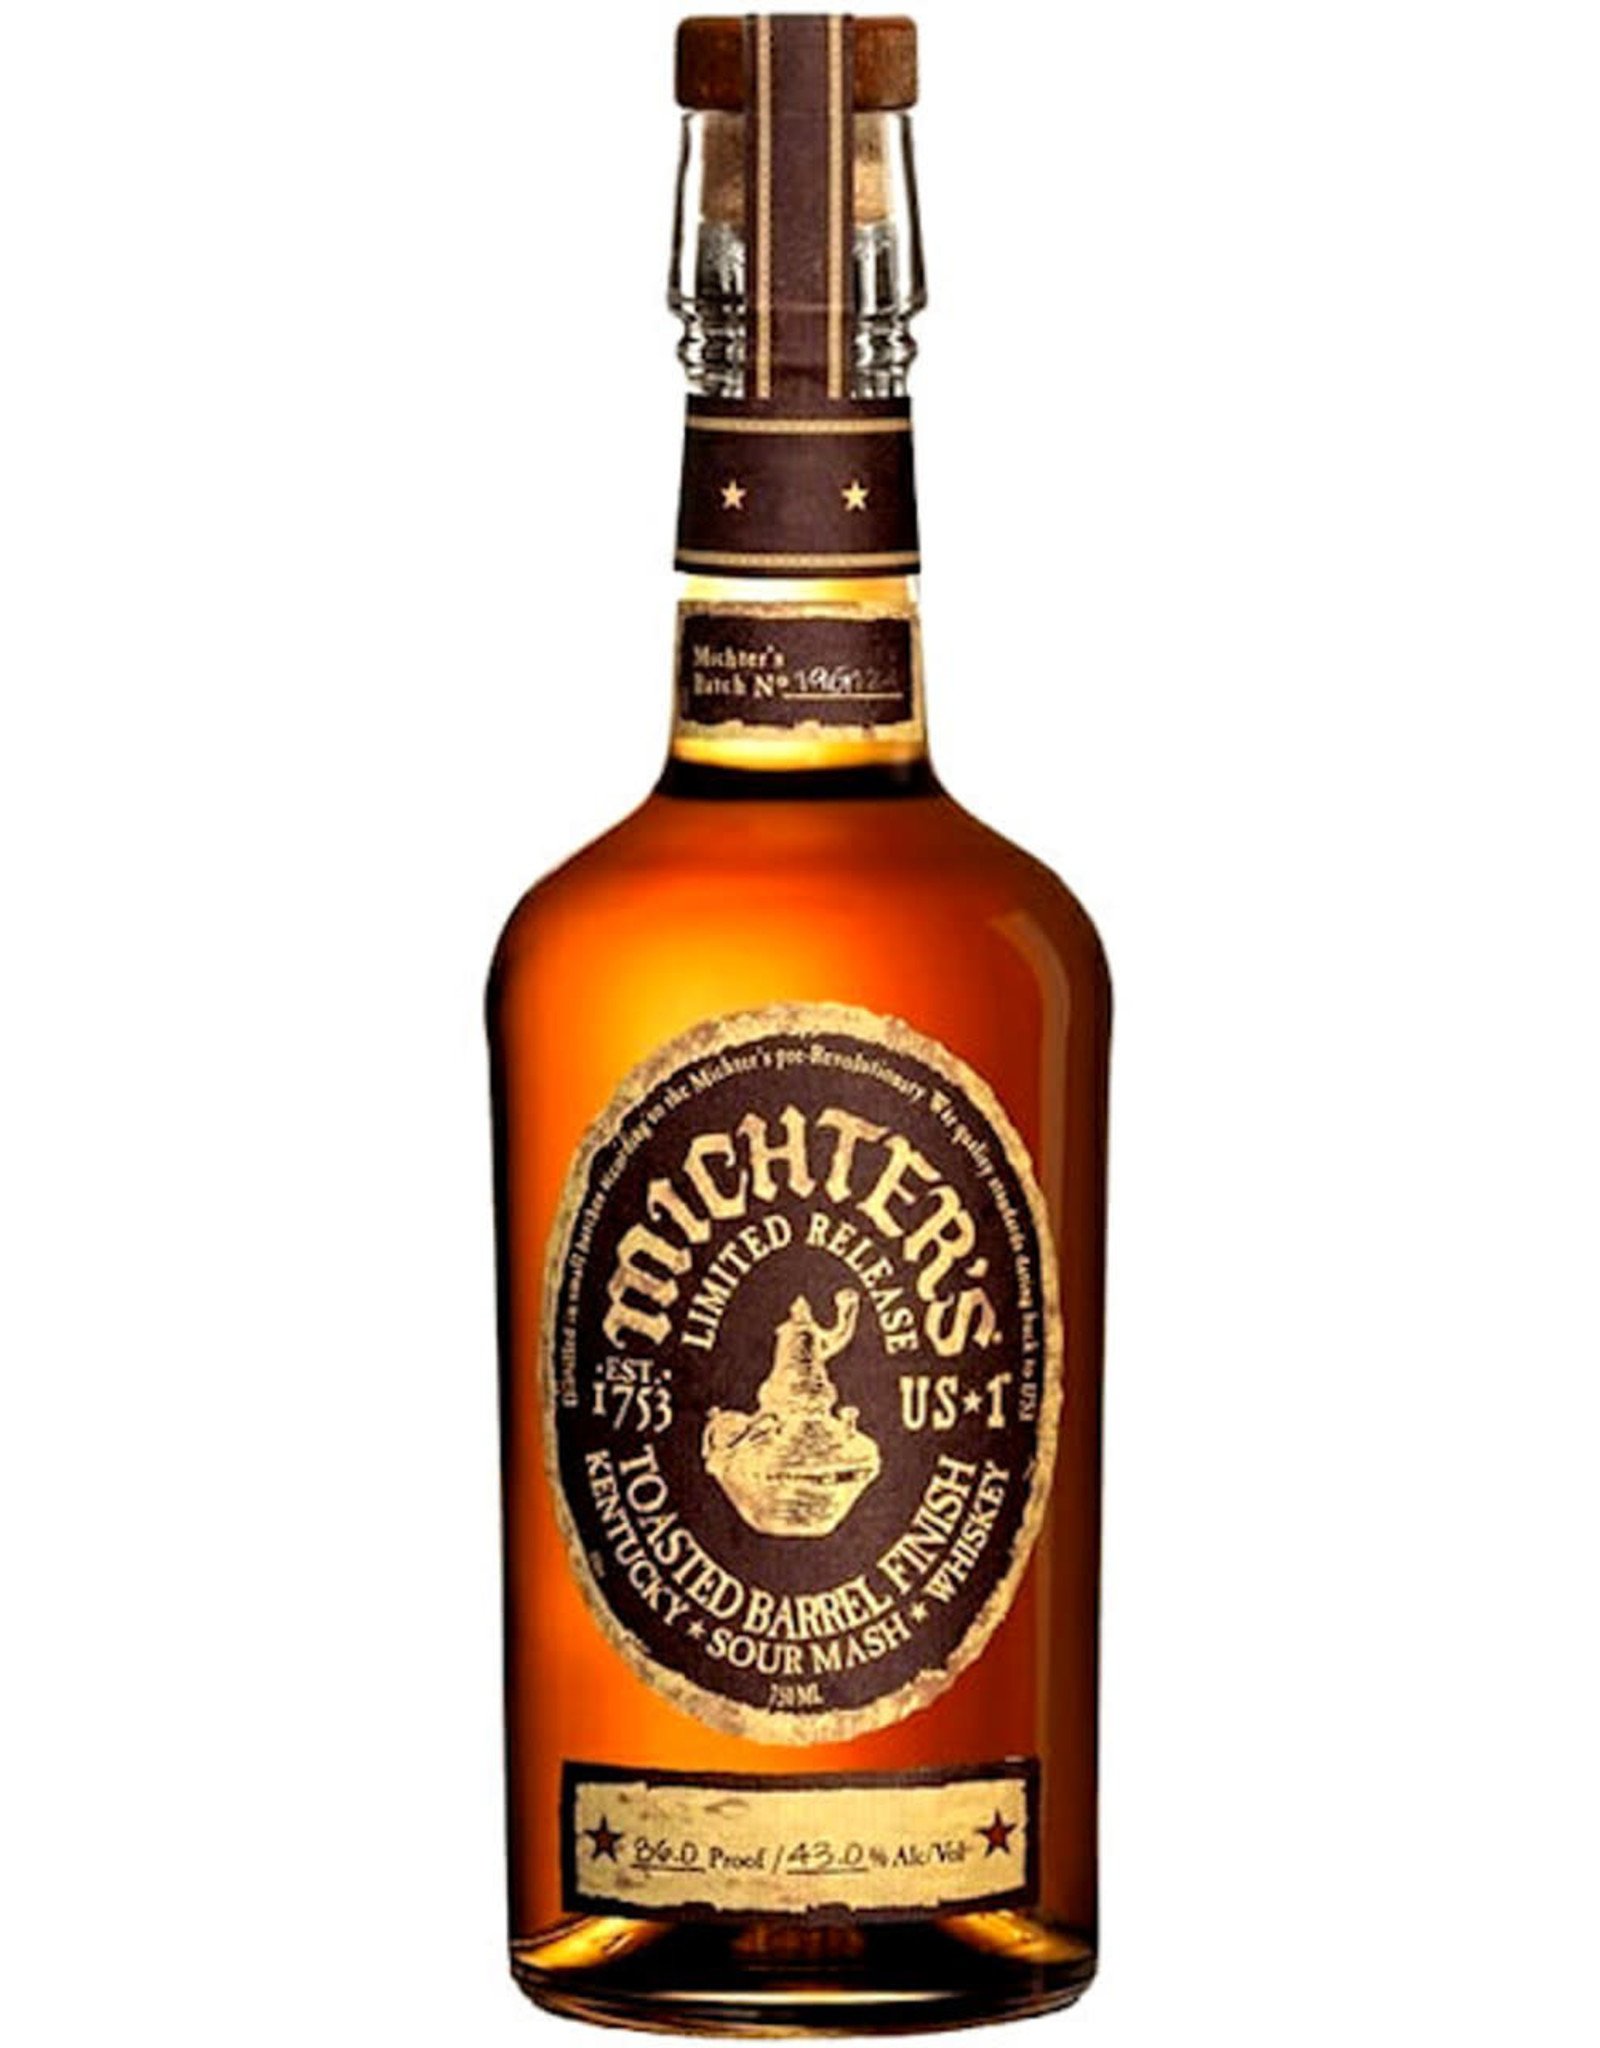 Michter's Michter's Toasted Barrel Finish 750 mL Limited Release